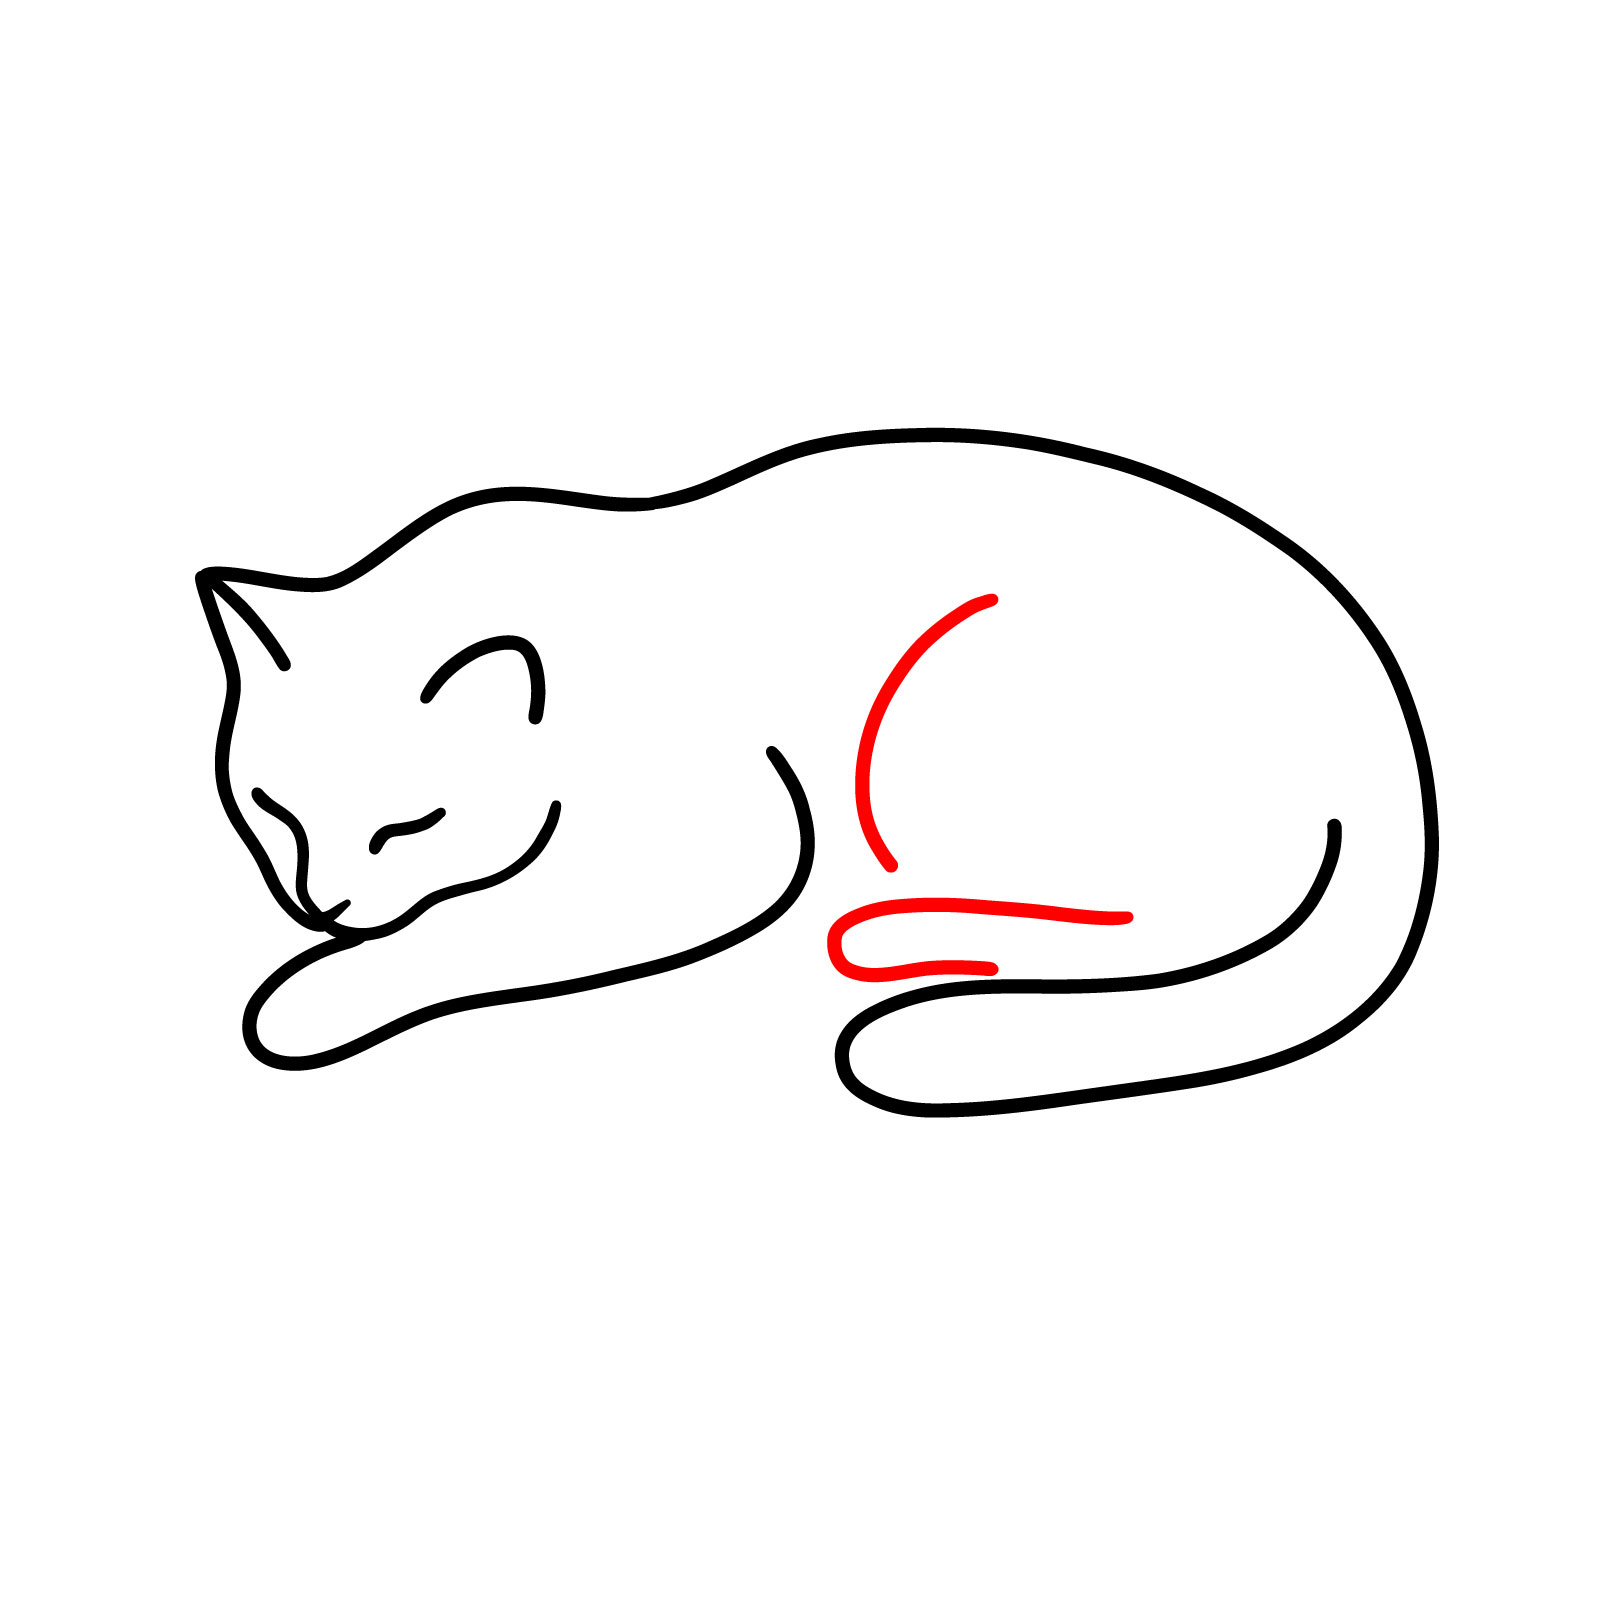 Outline for the visible back leg of the sleeping cat - step 05